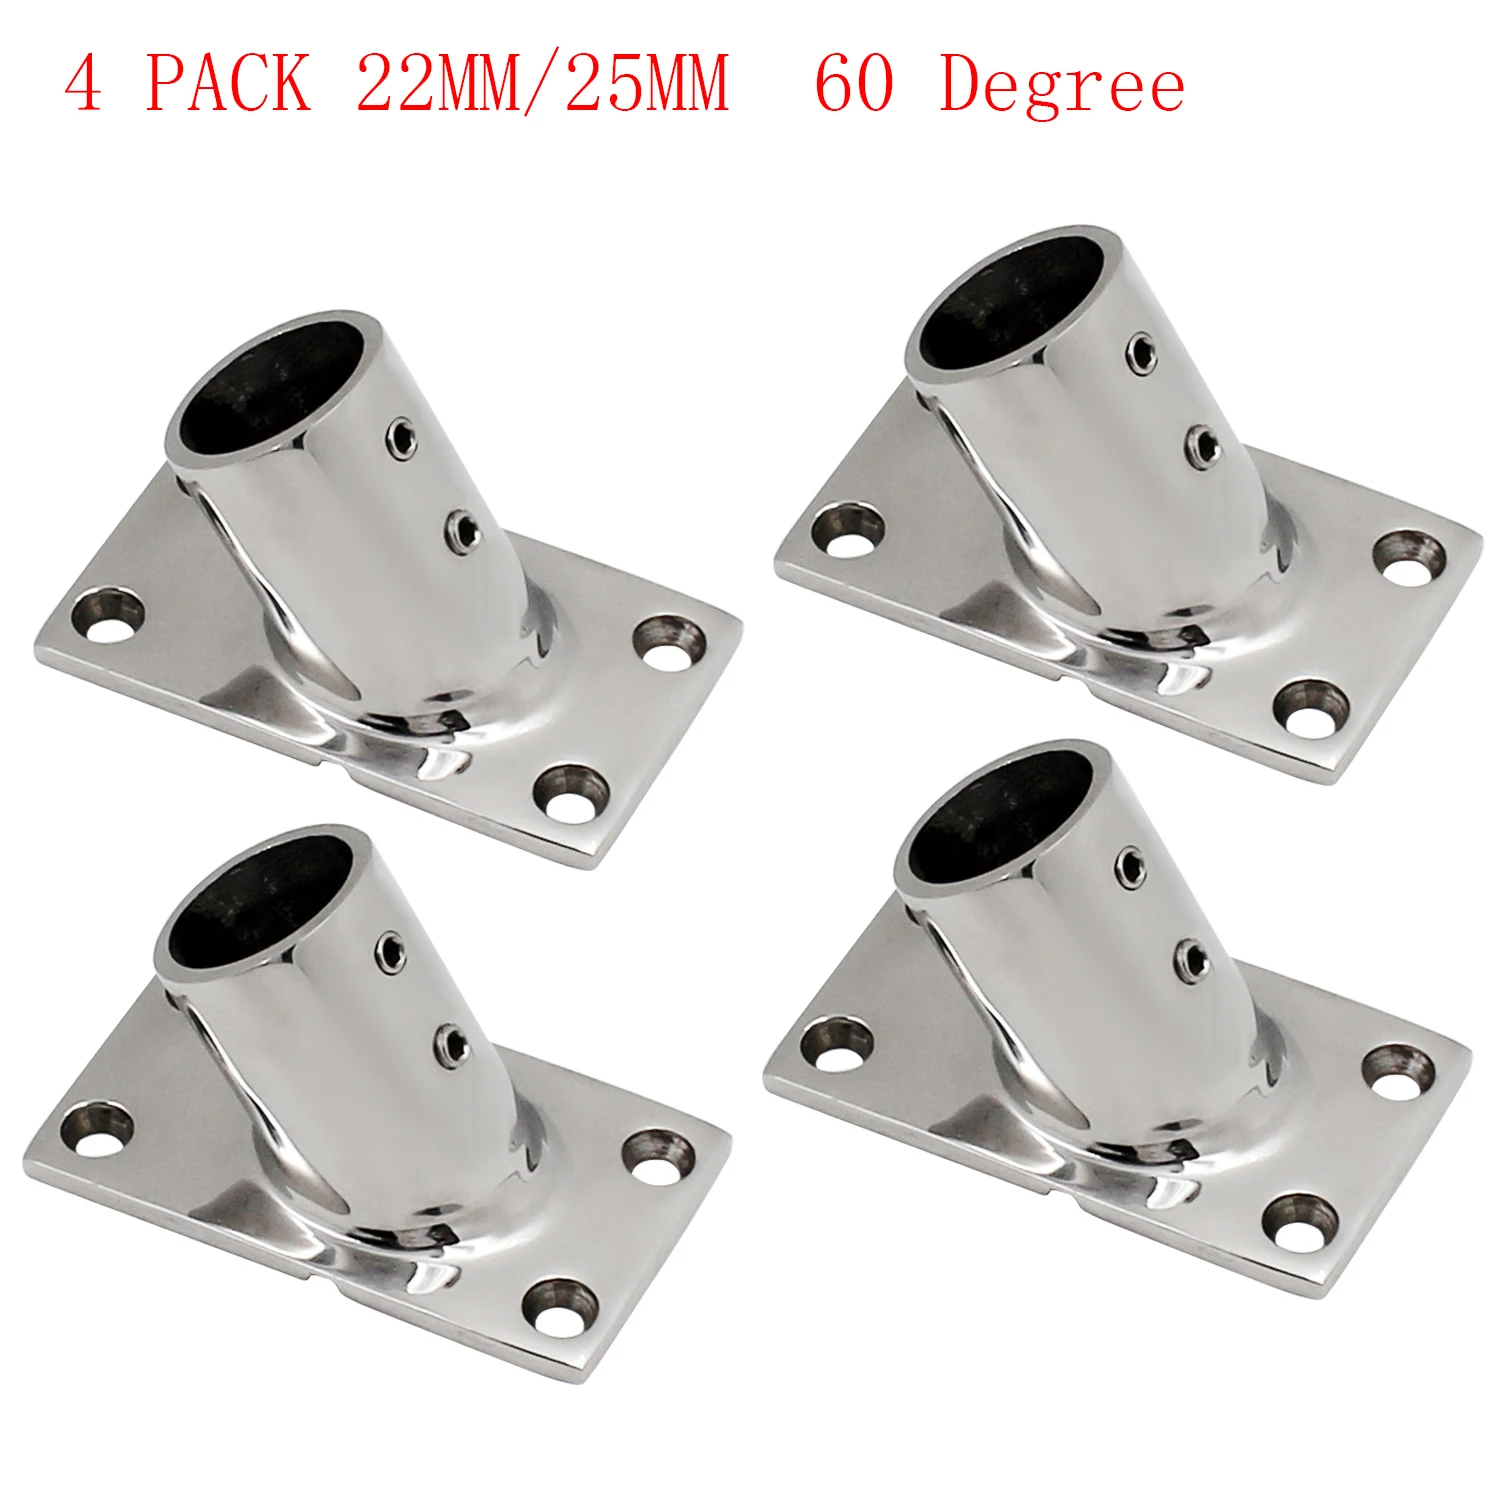 4 PCS 60 Degree Stainless Steel Boat Deck Hand Rail Fitting Stanchion Base for 7/8'' or 1'' Tube Boat Deck Handrail Fitting Hard enlarge